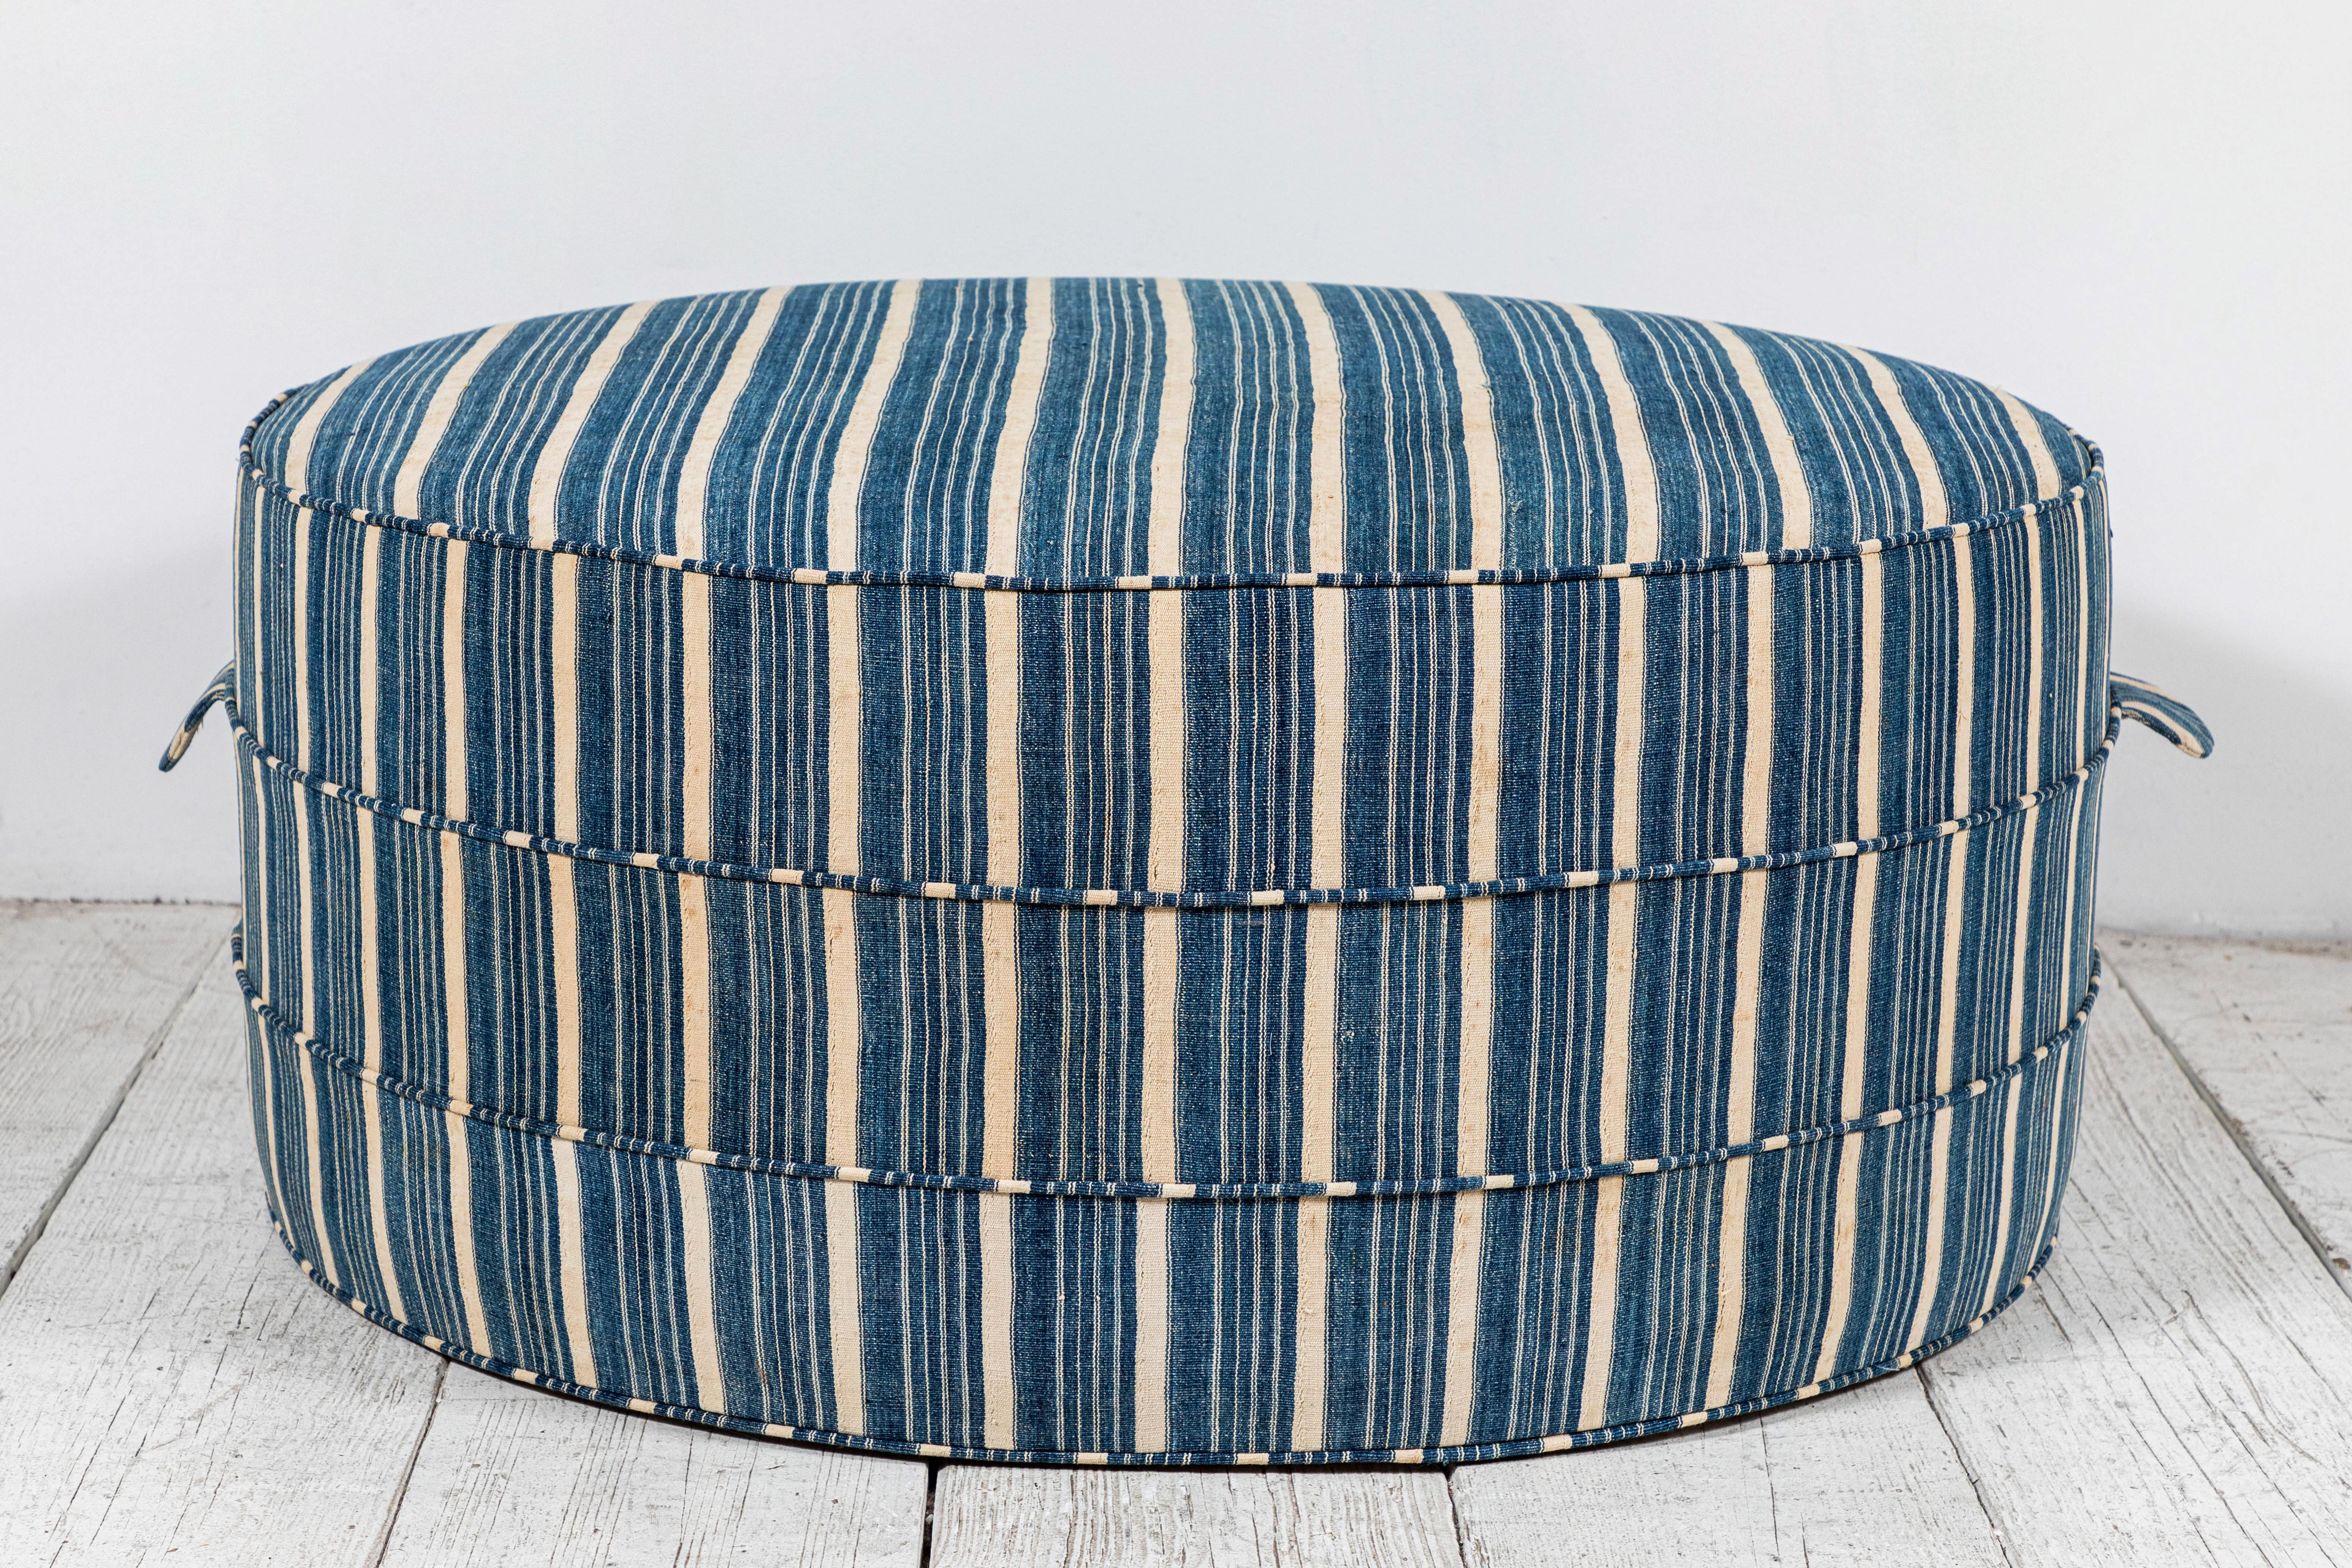 Solid wood frame and upholstered hassock with two ring piping and double handle details offers versatility in accent seating. This custom Nickey Kehoe Collection round ottoman is upholstered in vintage African striped Indigo from Burkina Faso.